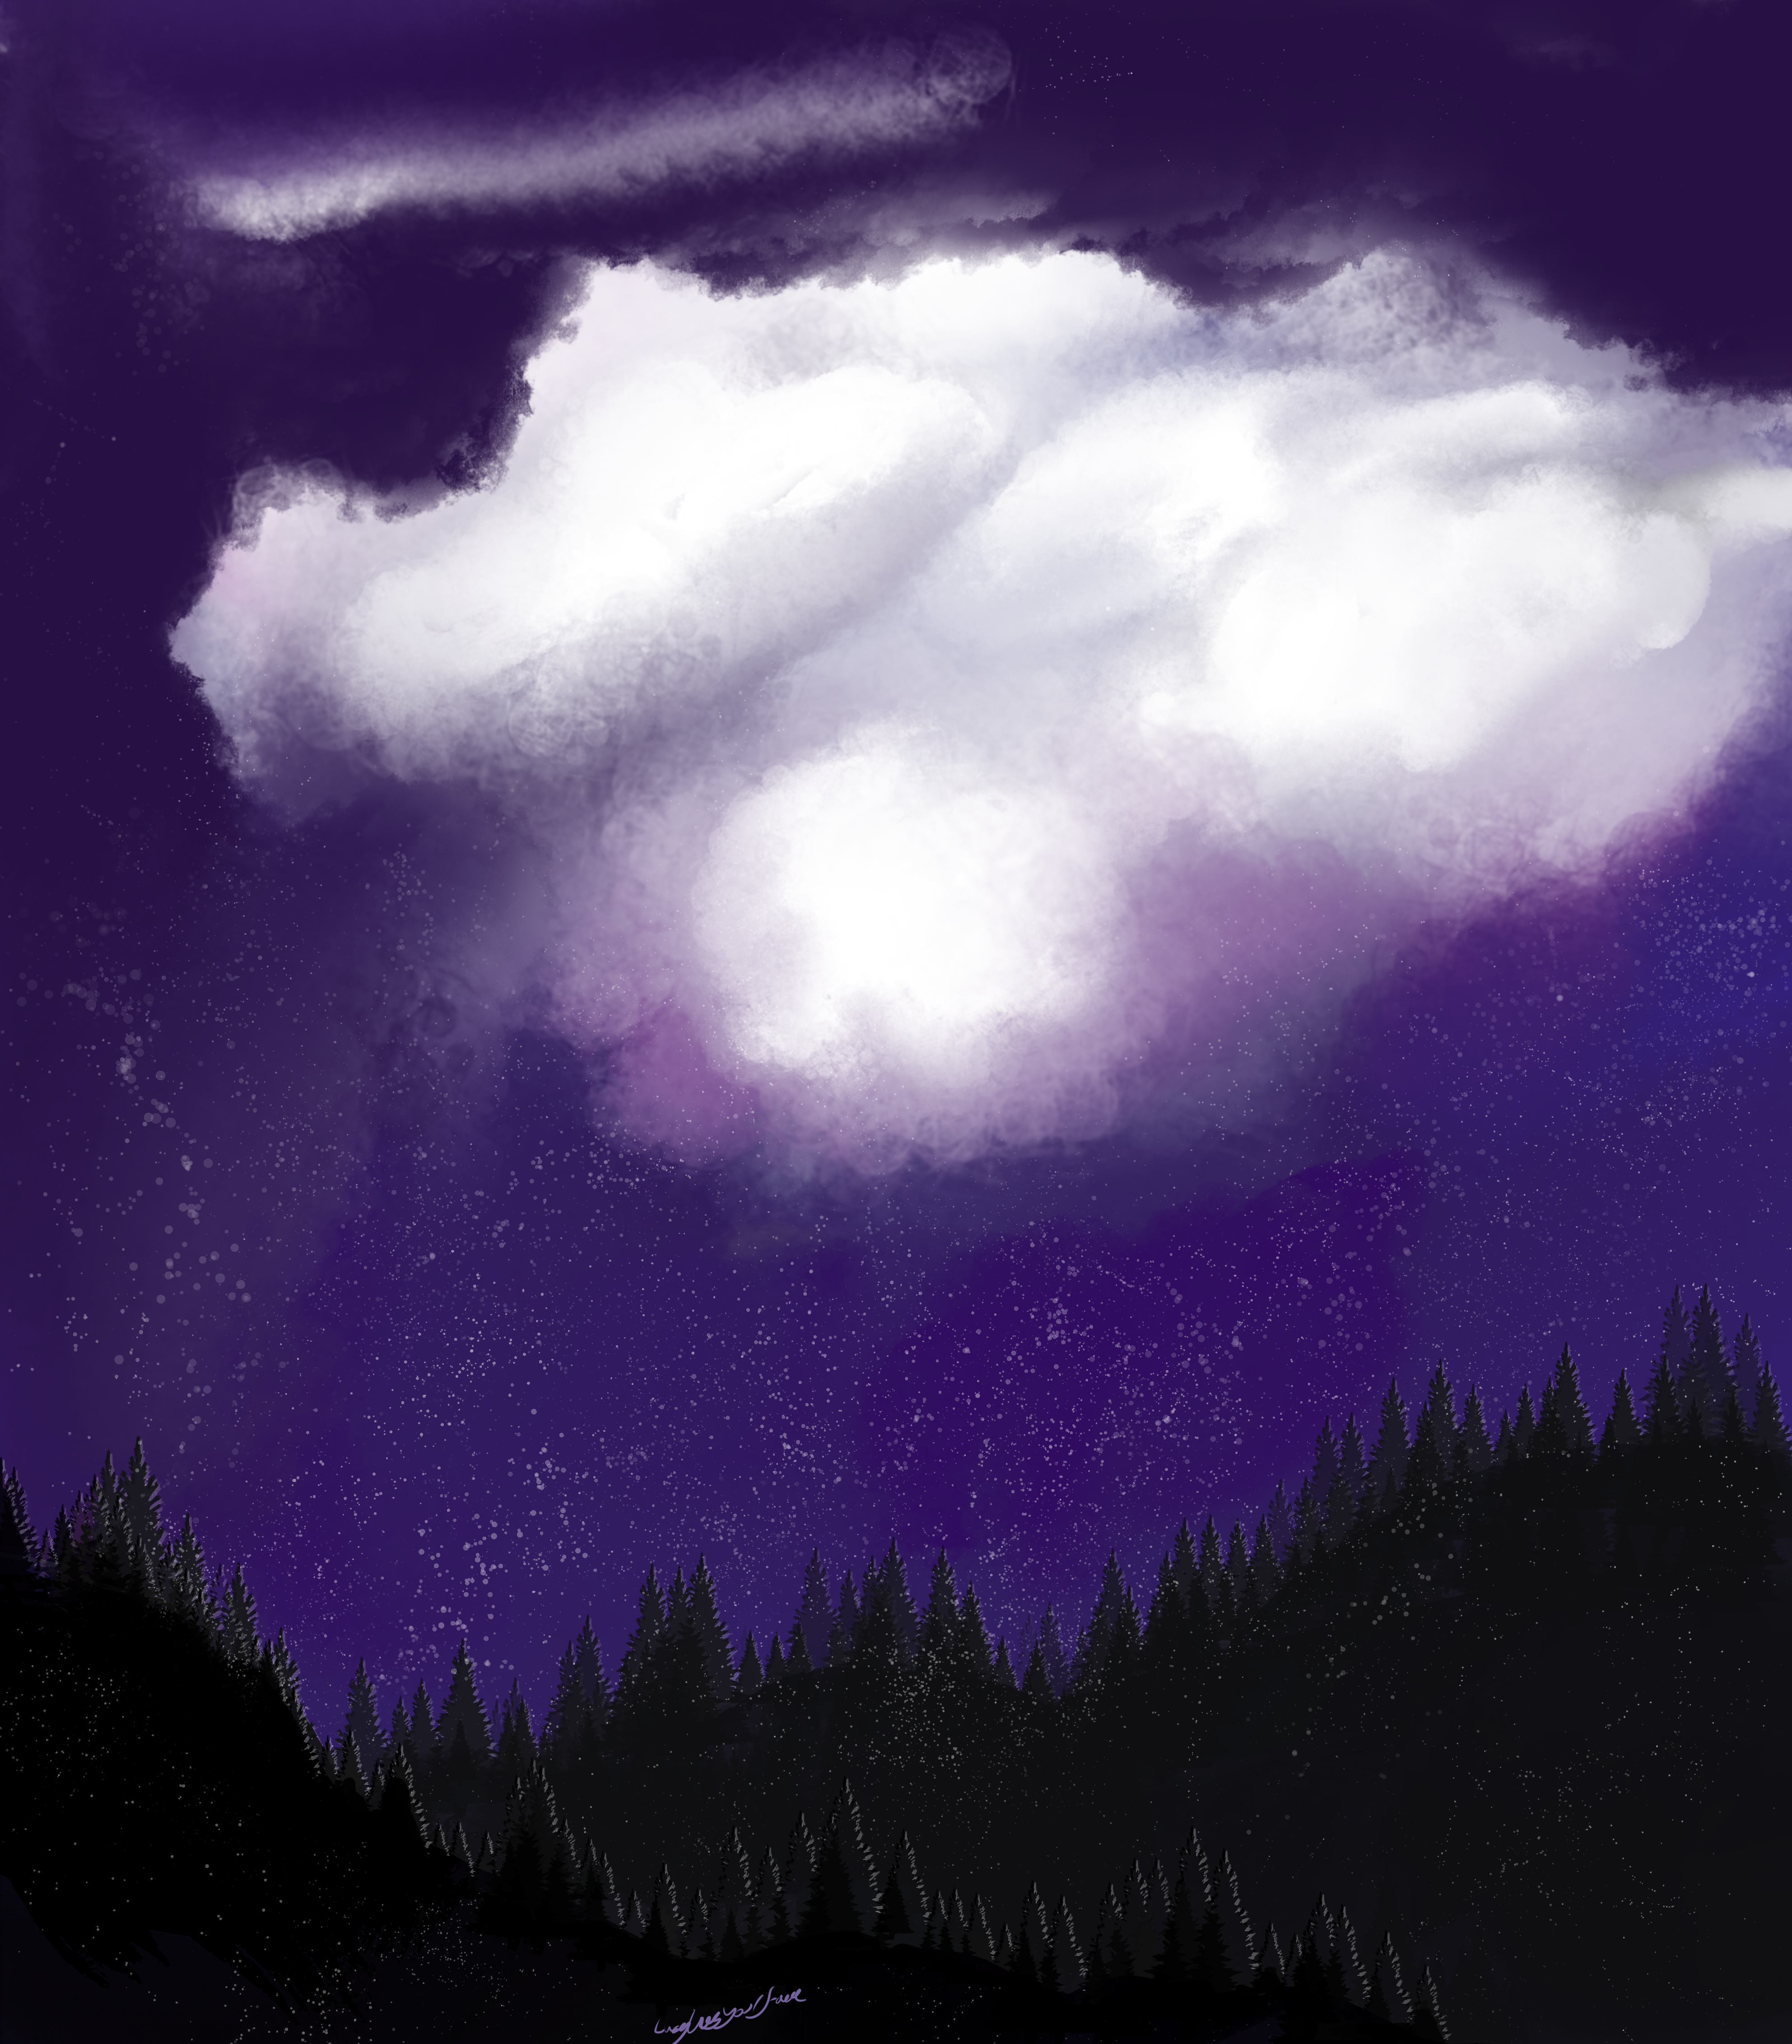 Digital art of a silhouette forest beneath a purple night sky. A large billowing white cloud is snowing over the scene.